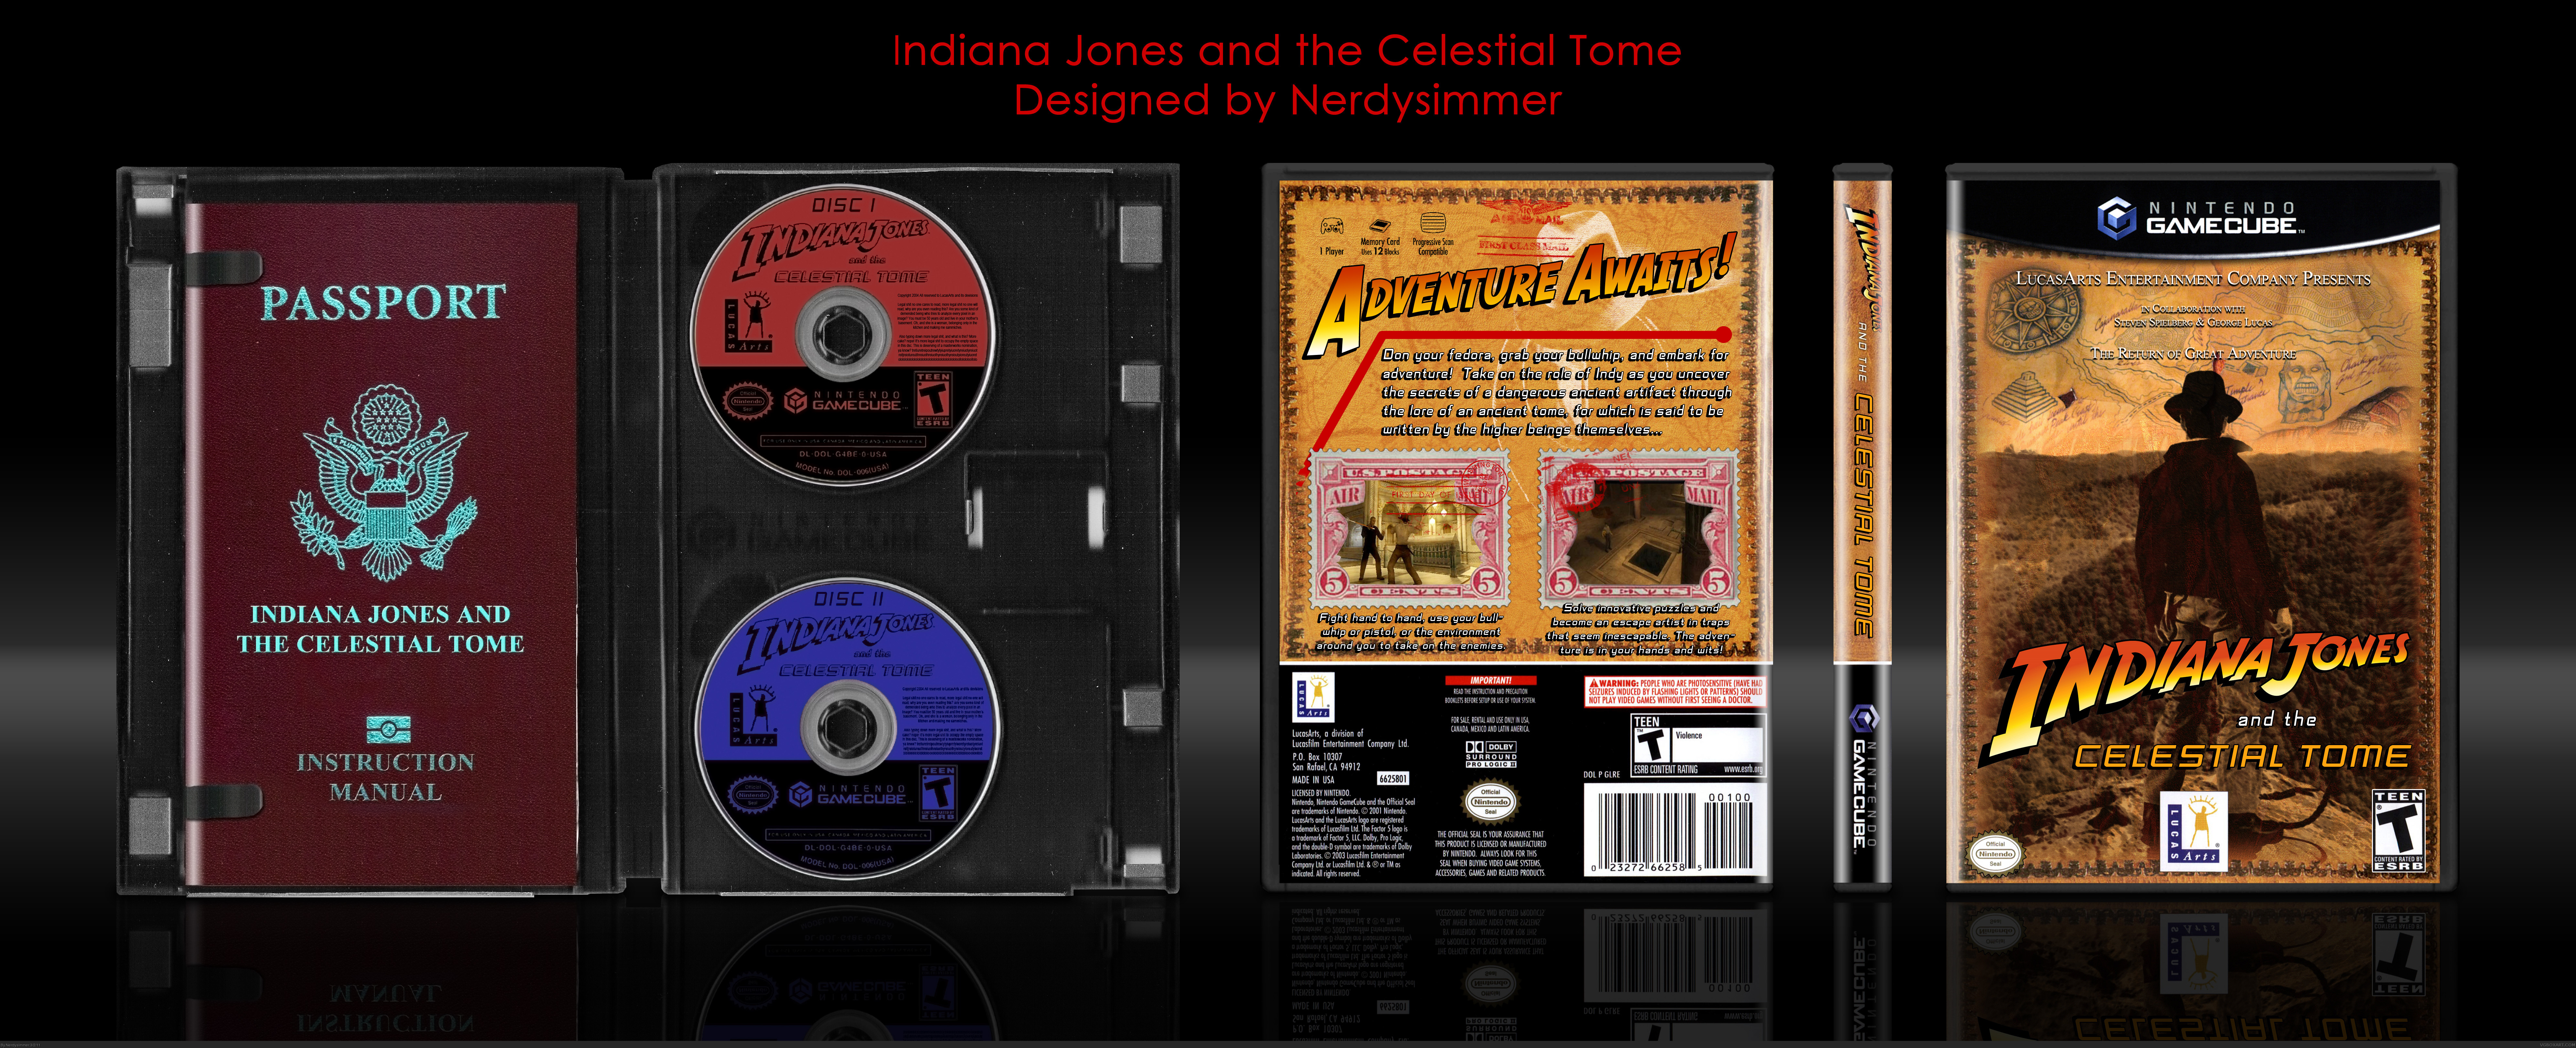 Indiana Jones and the Celestial Tome box cover